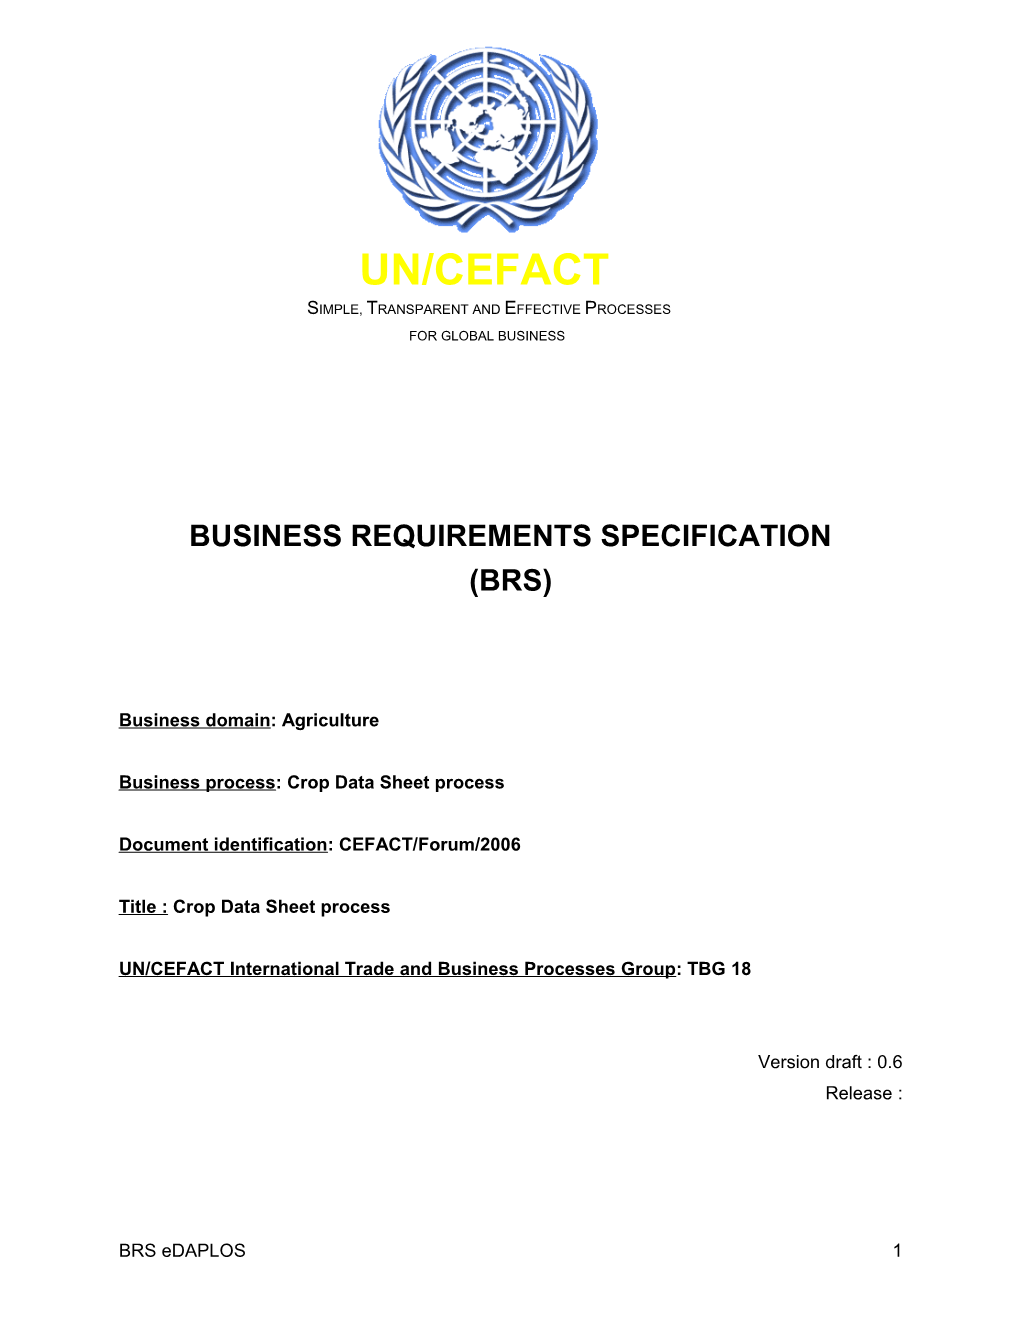 Business Requirements Specification s1